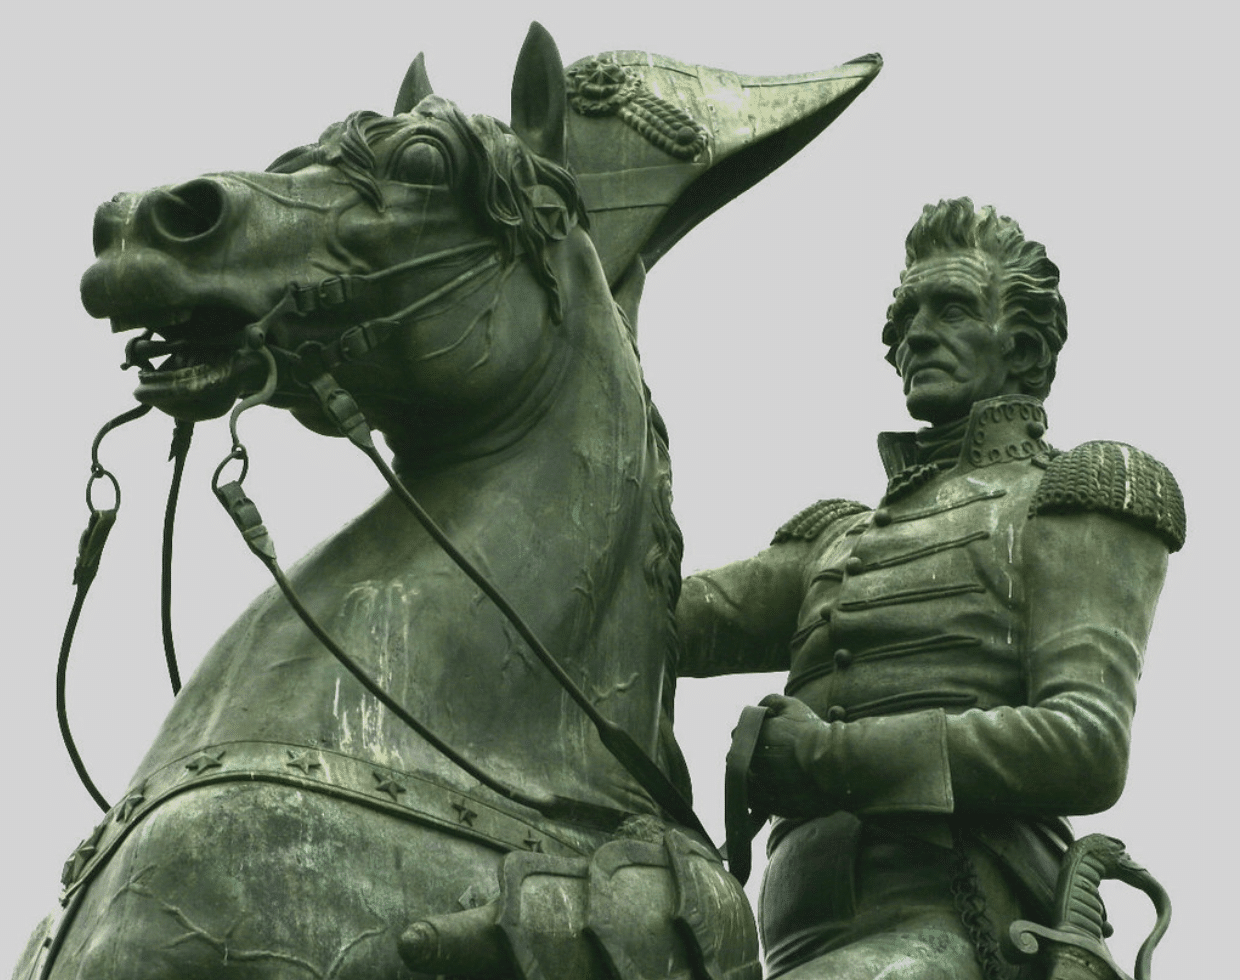 Andrew Jackson in Lafayette Square, Photo by David, dbKing, via Flickr. Creative Commons License